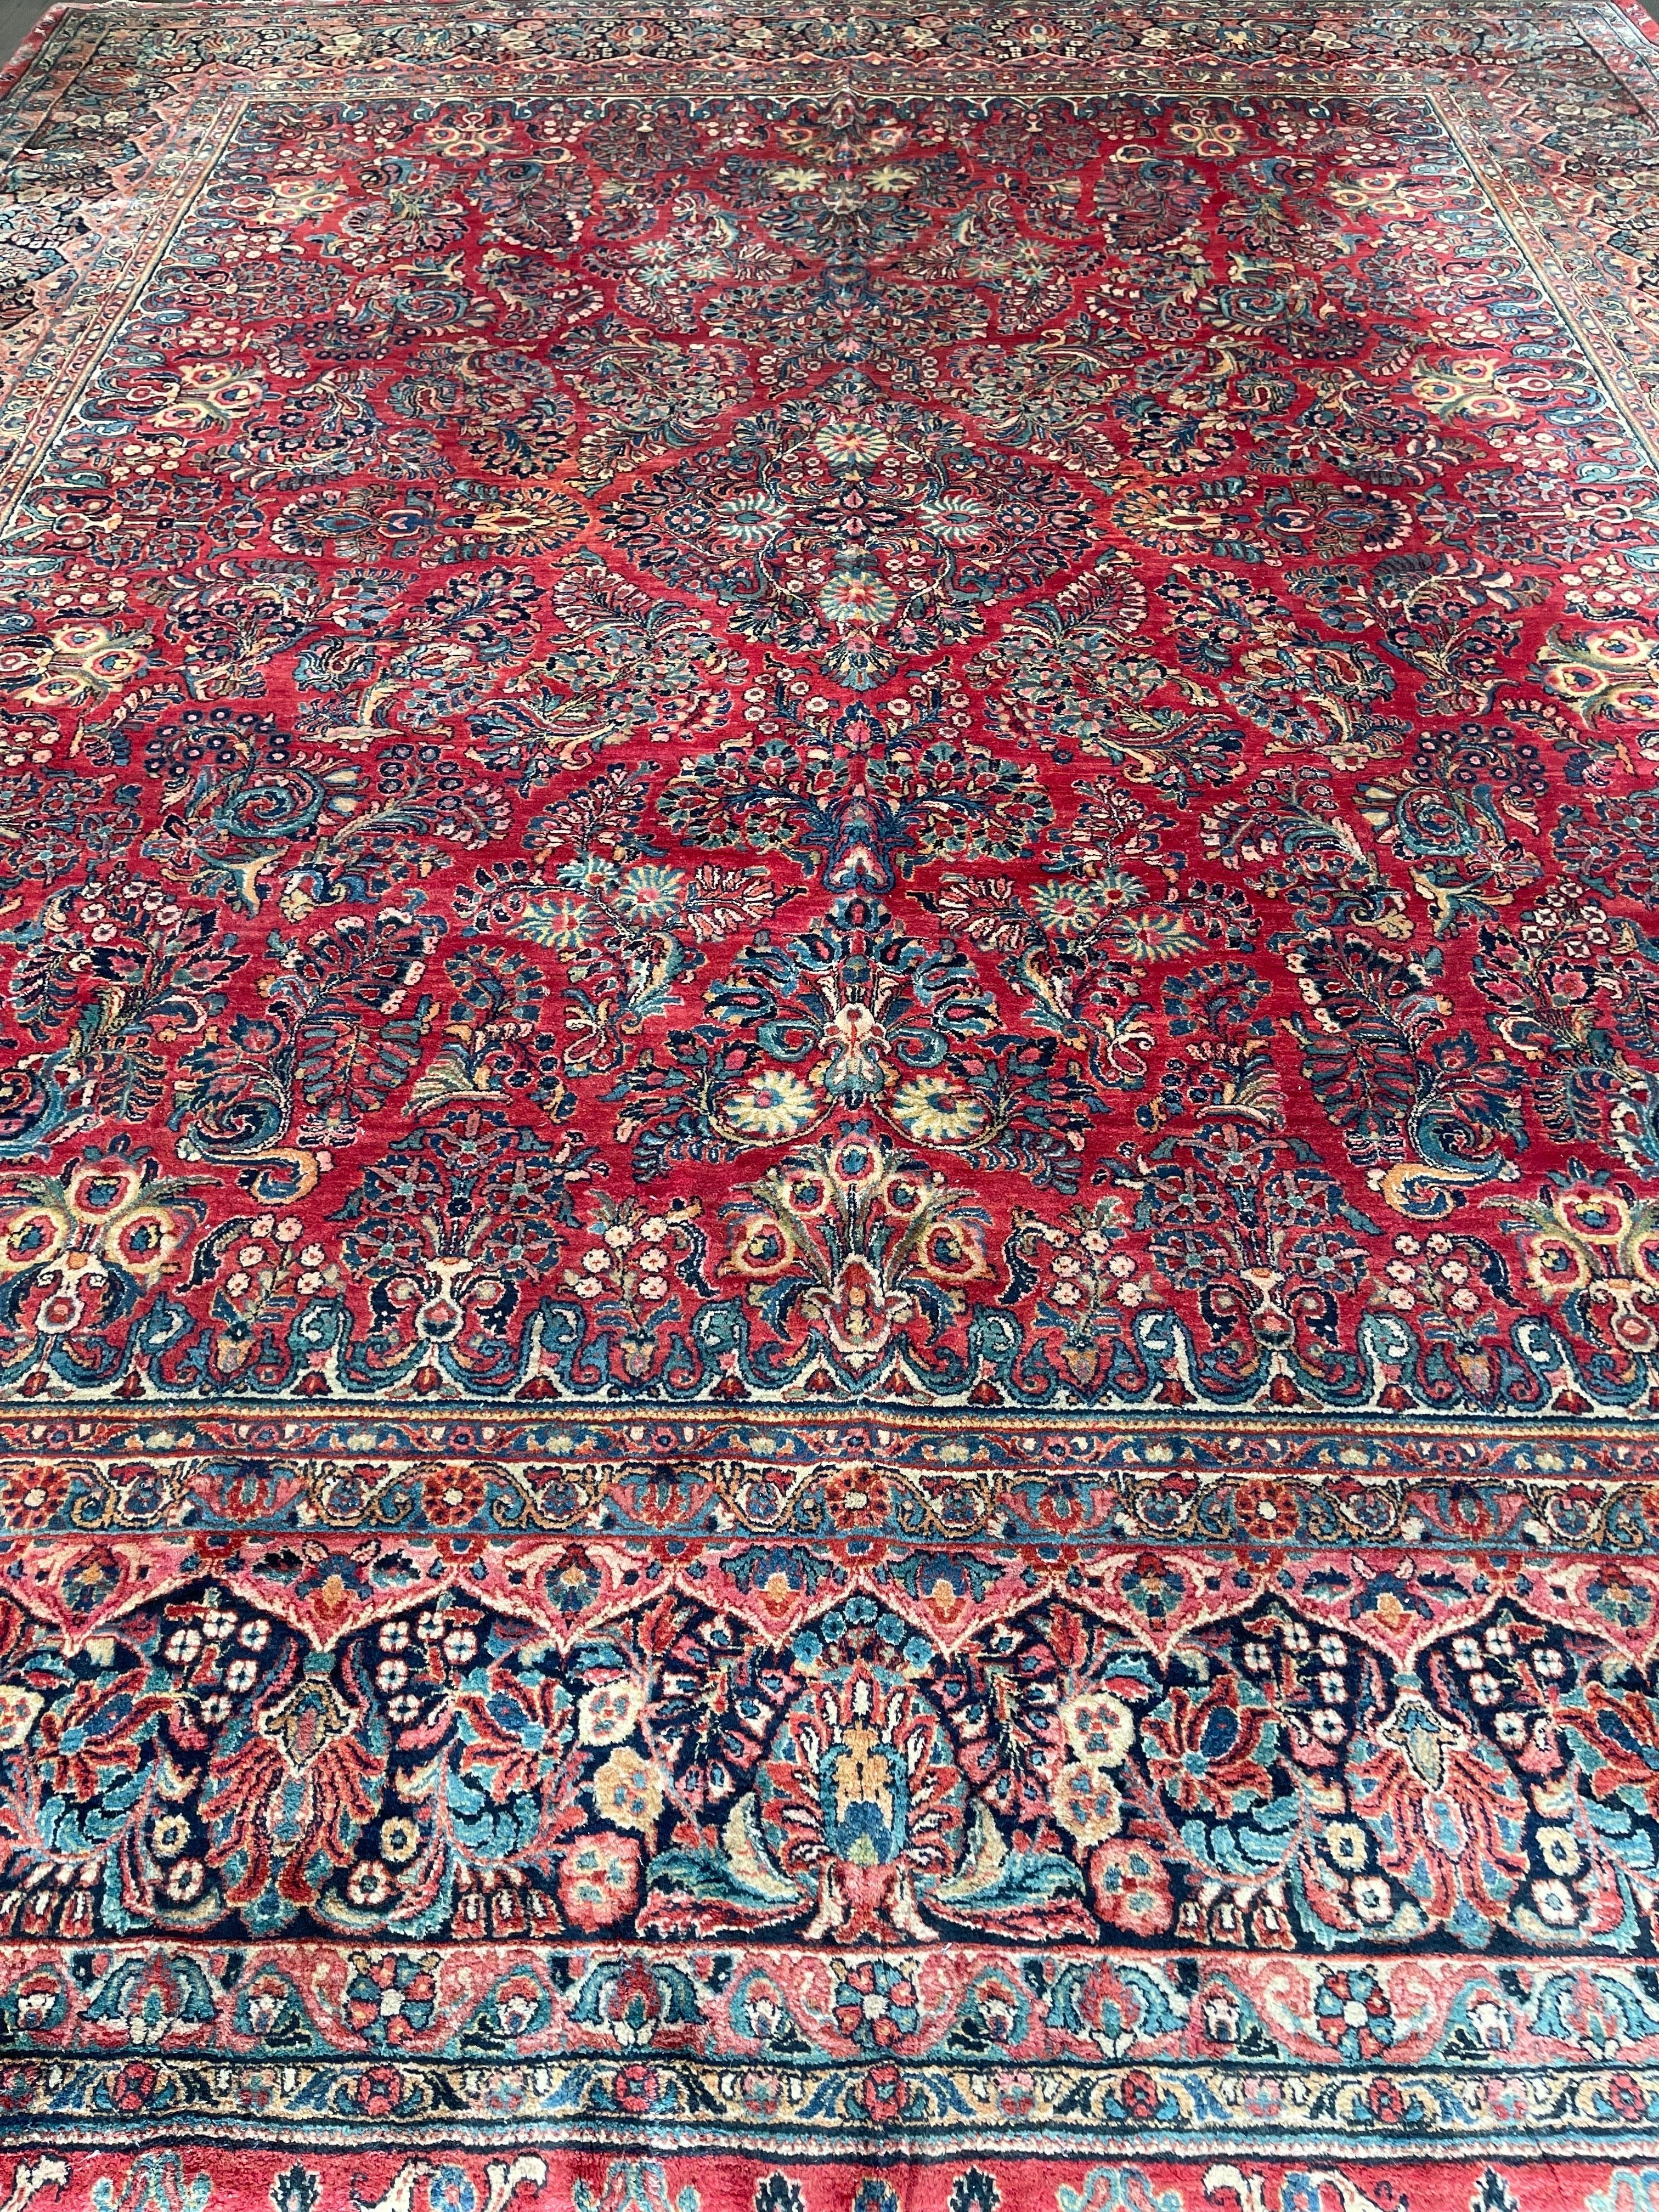 Absolutely flawless antique Persian Sarouk featuring a red/maroon field surrounded by a navy blue border.This classic rug is decorated with large flowers and a very small floral medallion. The rug is made with superb resilient and well pounded wool